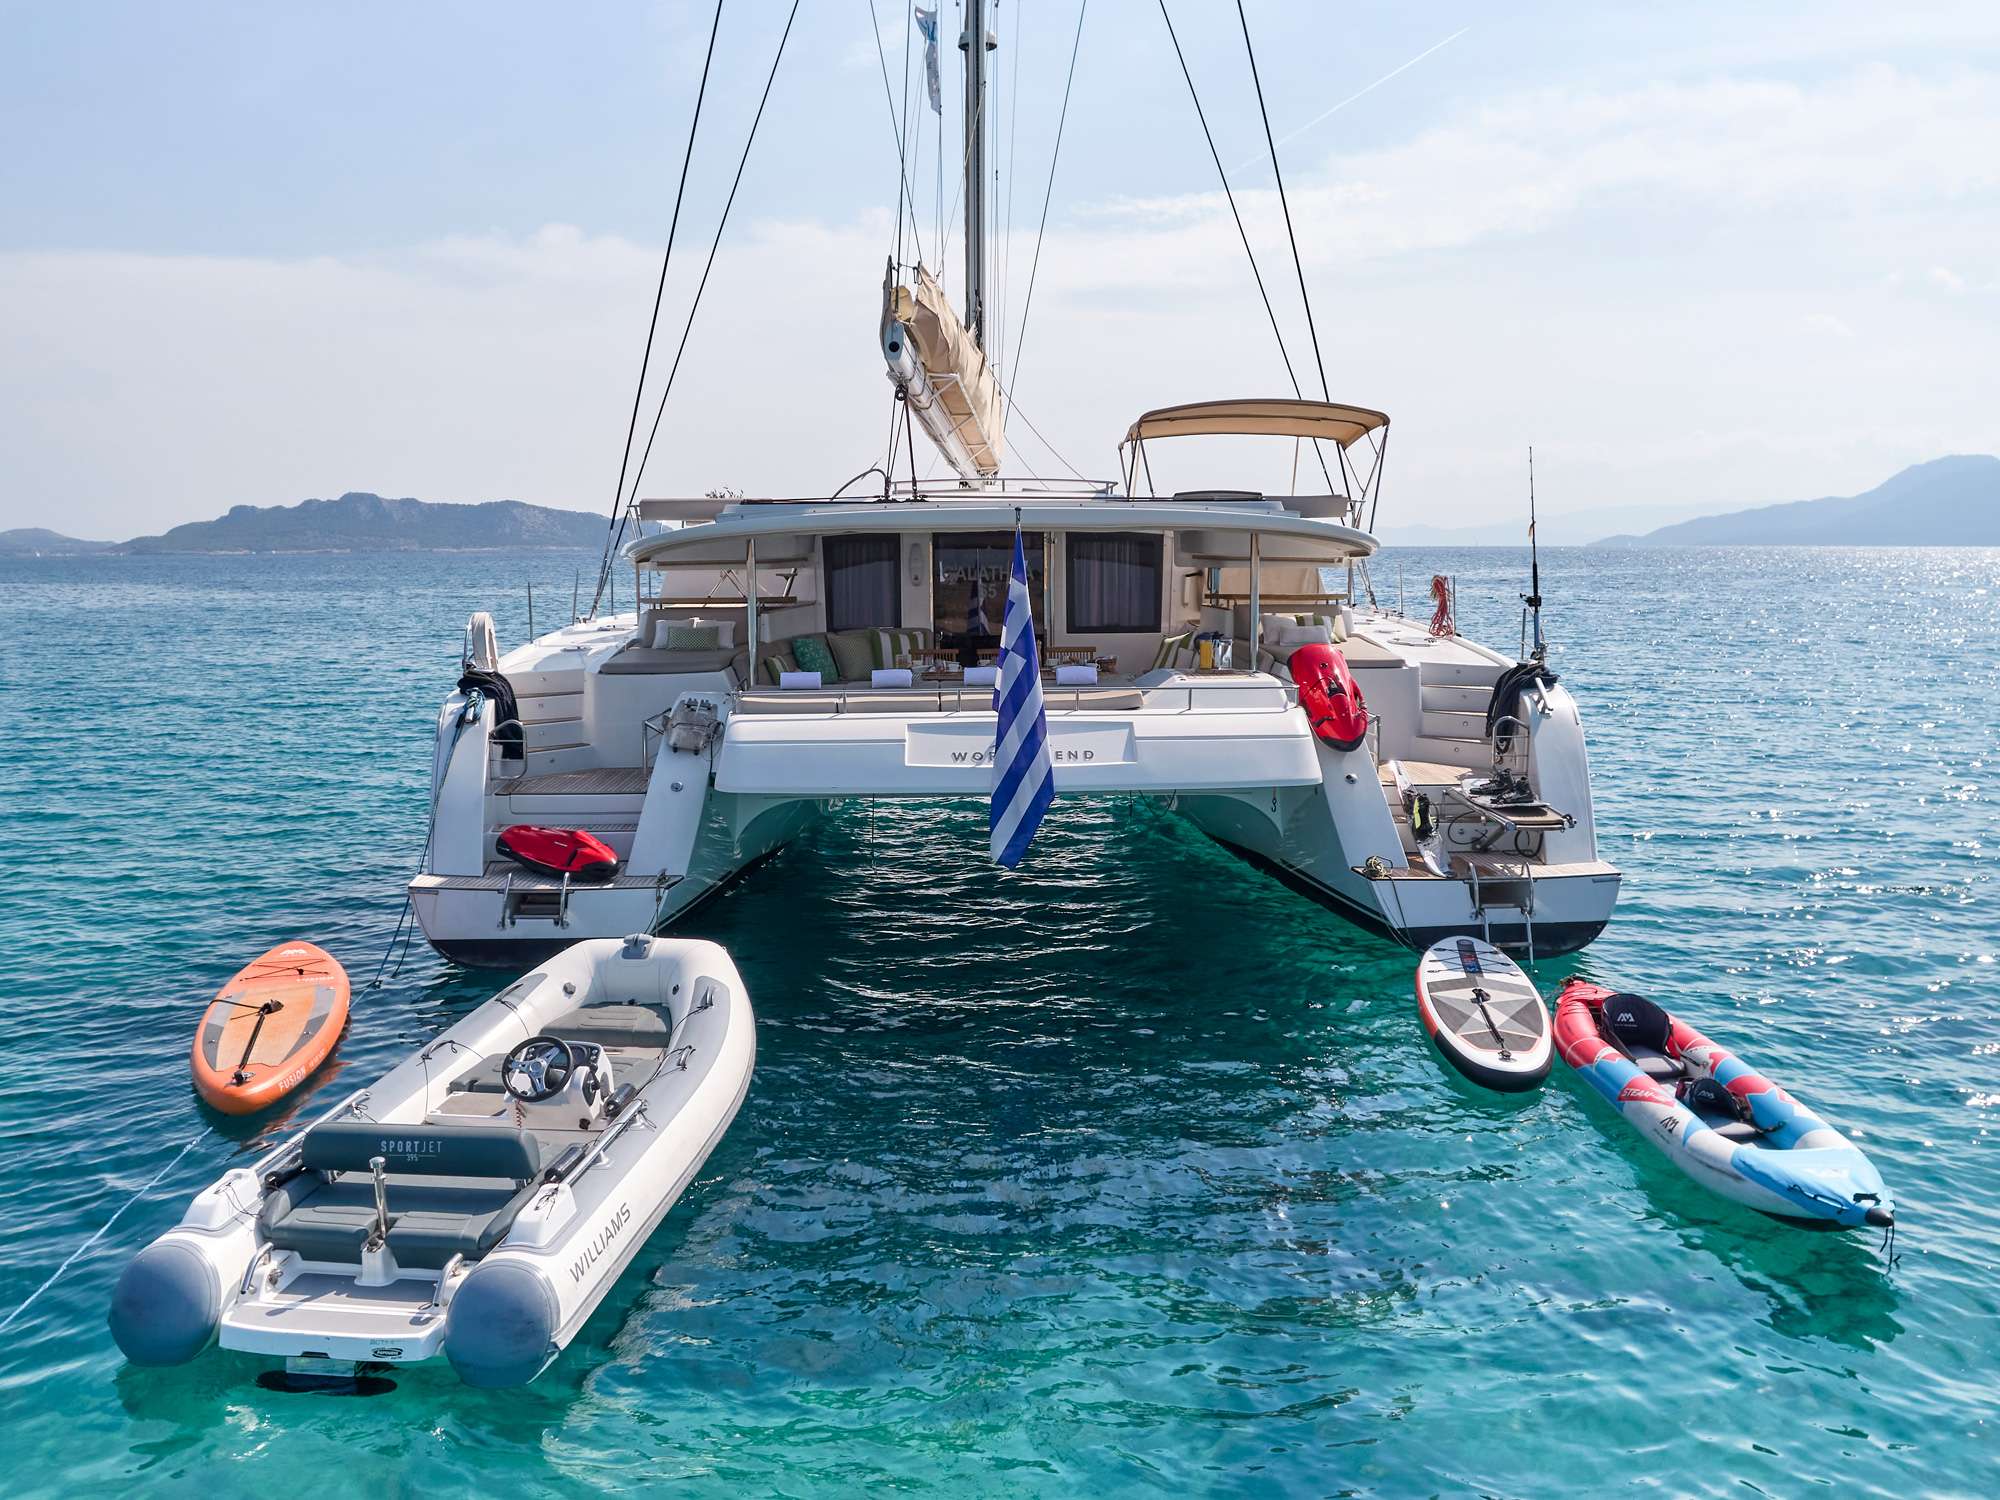 Catamaran Yacht 'WORLD'S END (MED)', 10 PAX, 3 Crew, 65.00 Ft, 19.00 Meters, Built 2011, Fountaine Pajot, Refit Year 2016/2020